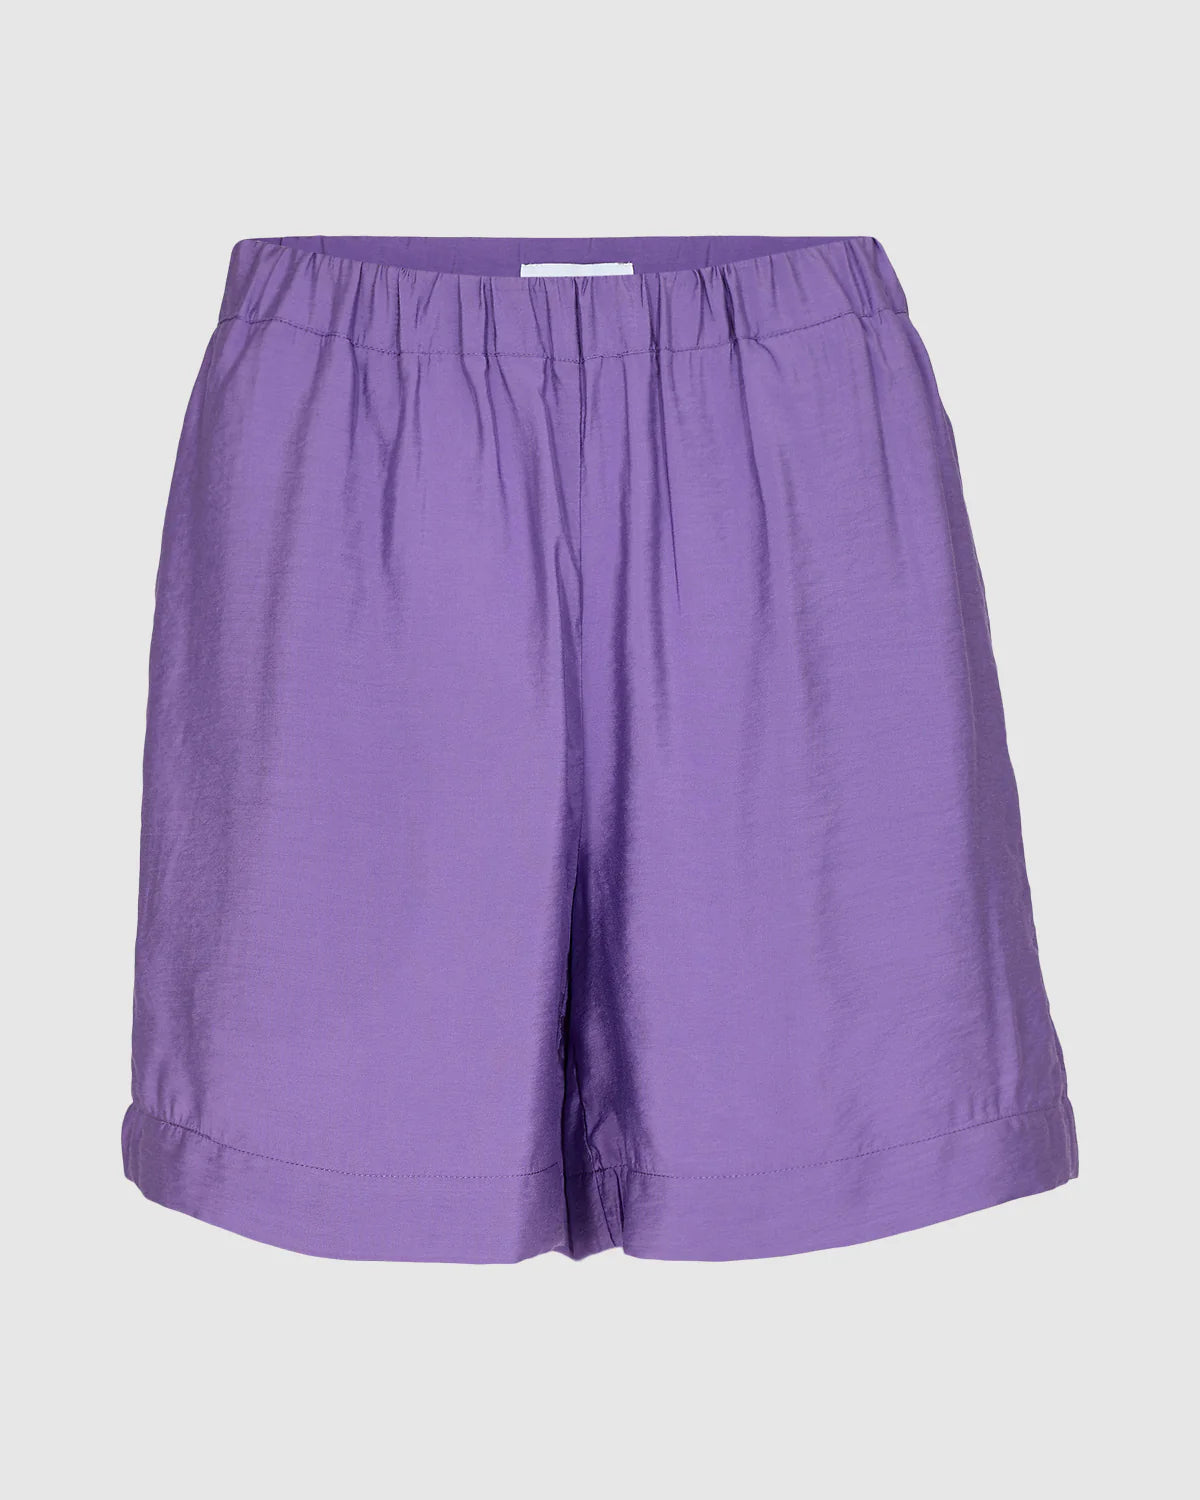 Acazia Shorts in Chive Blossom Purple